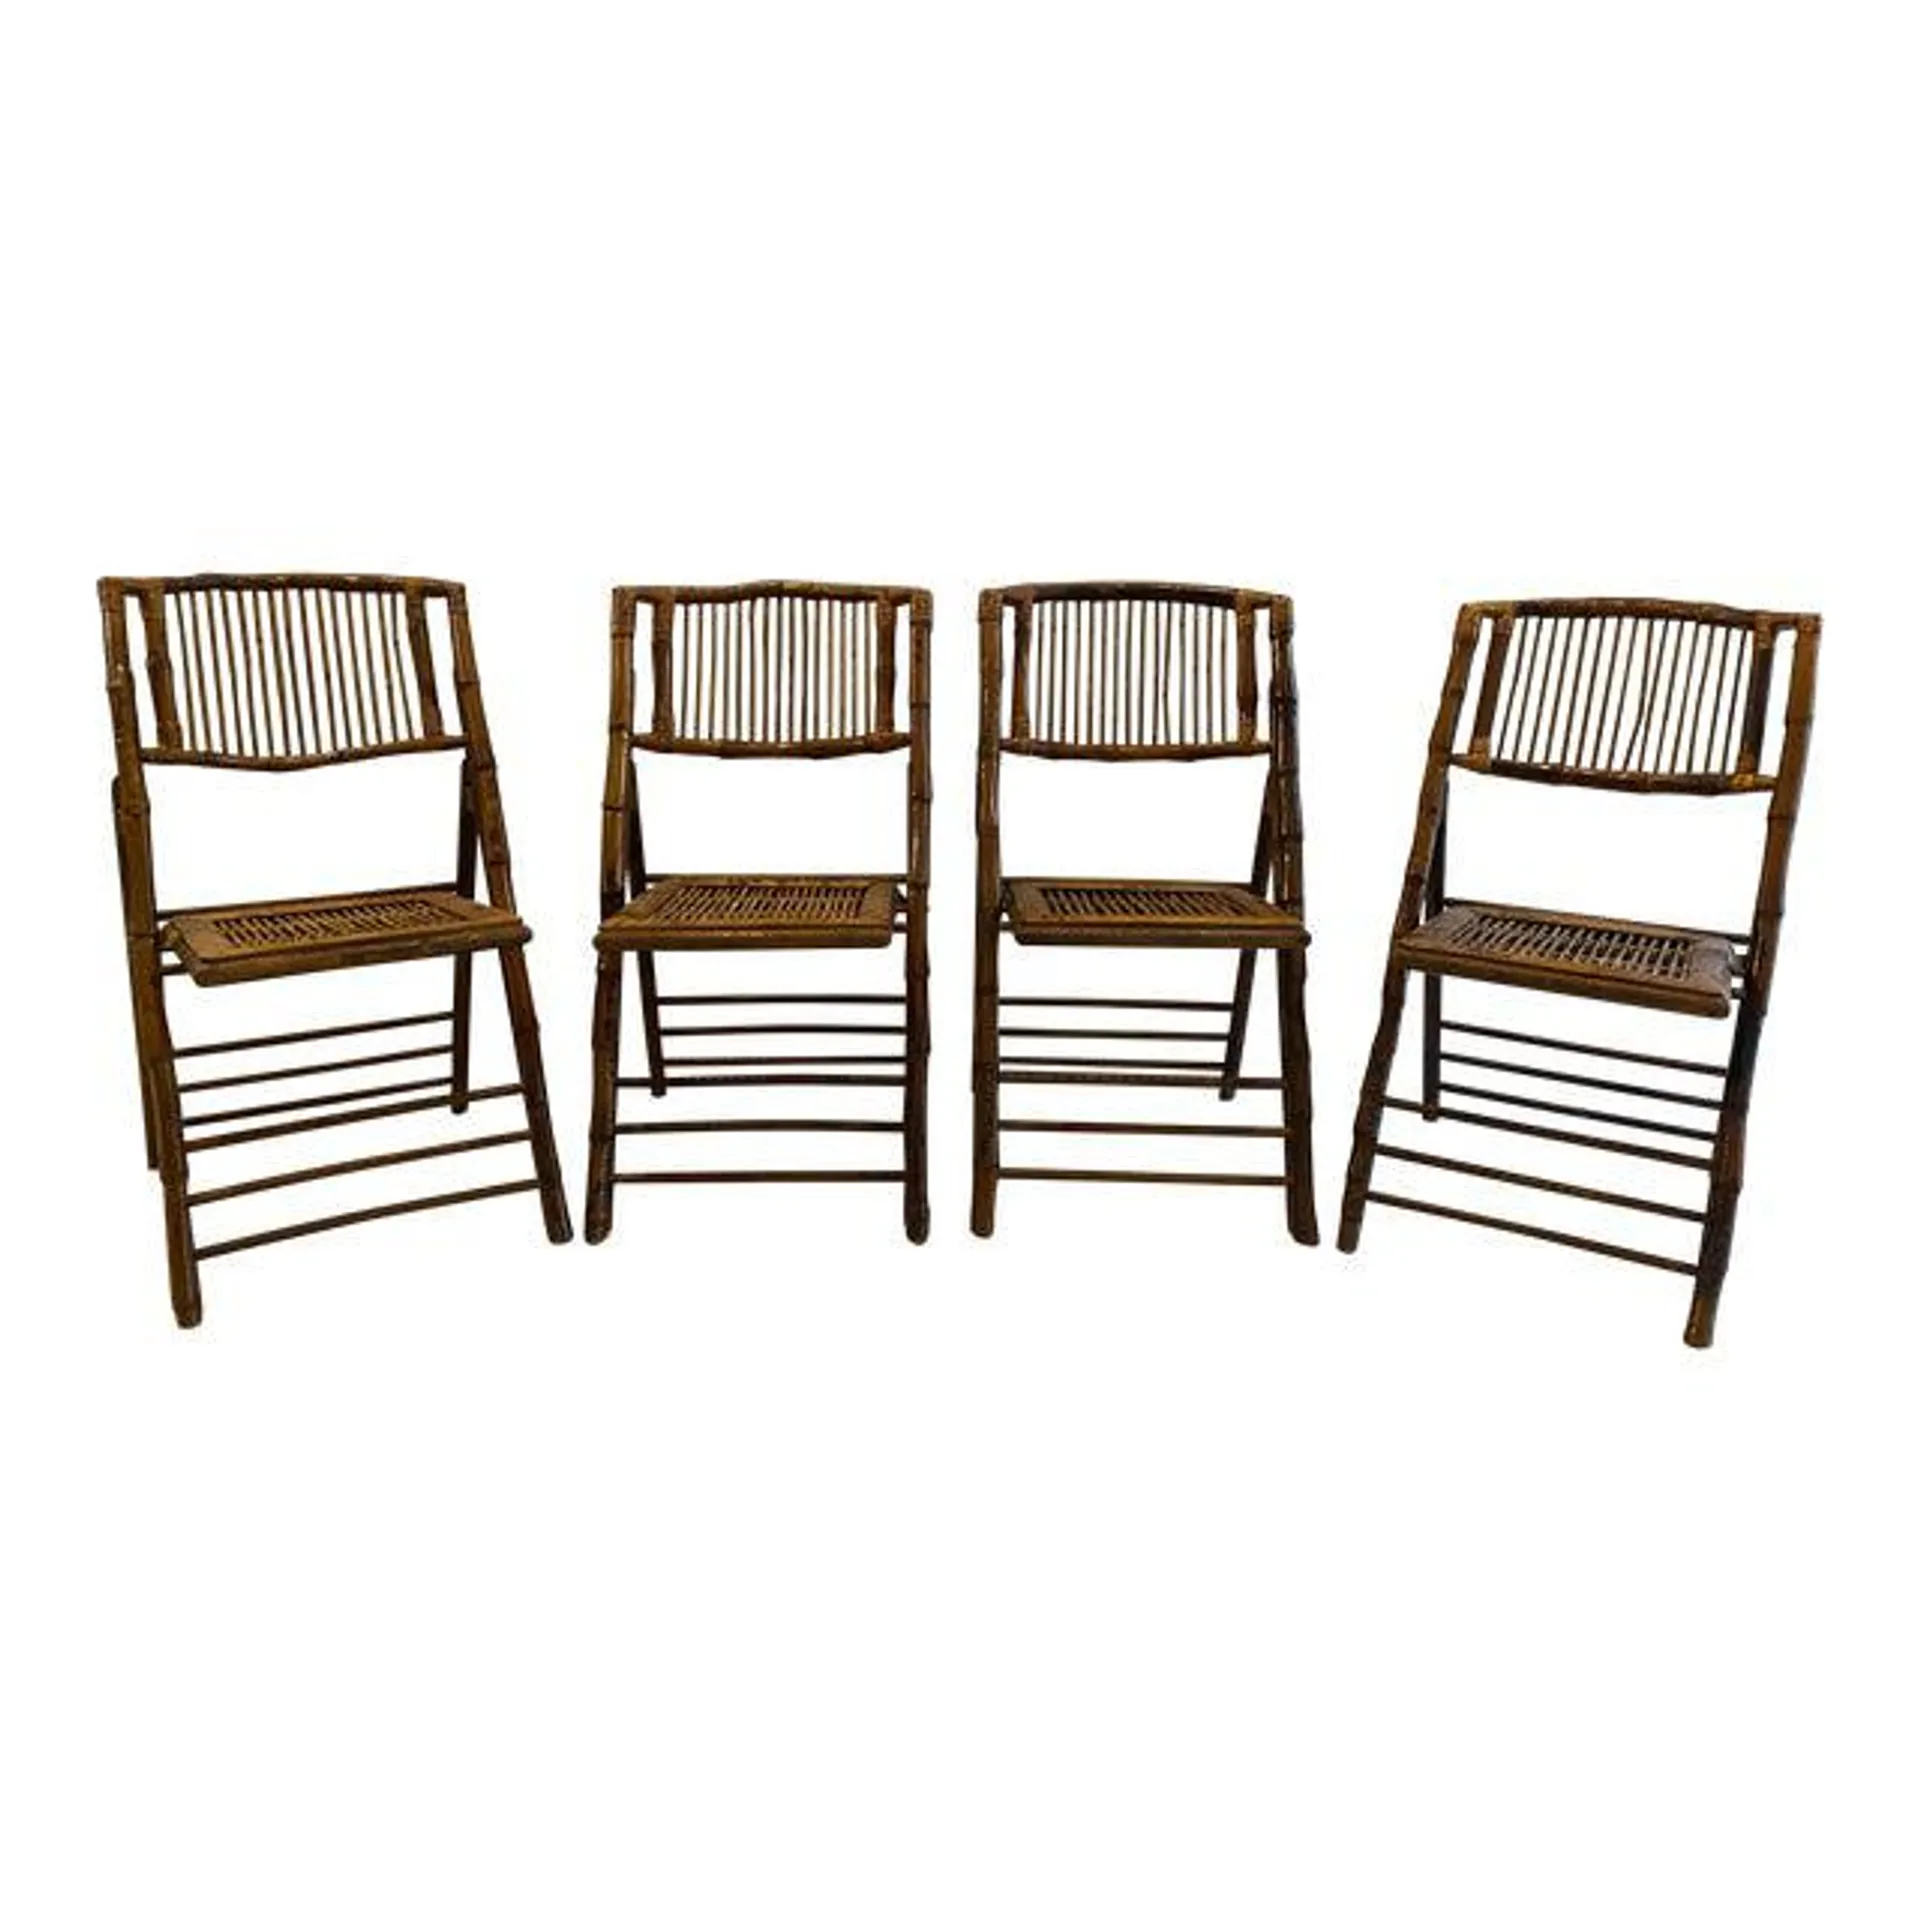 1970s Vintage Scorched Bamboo Folding Chairs - Set of 4